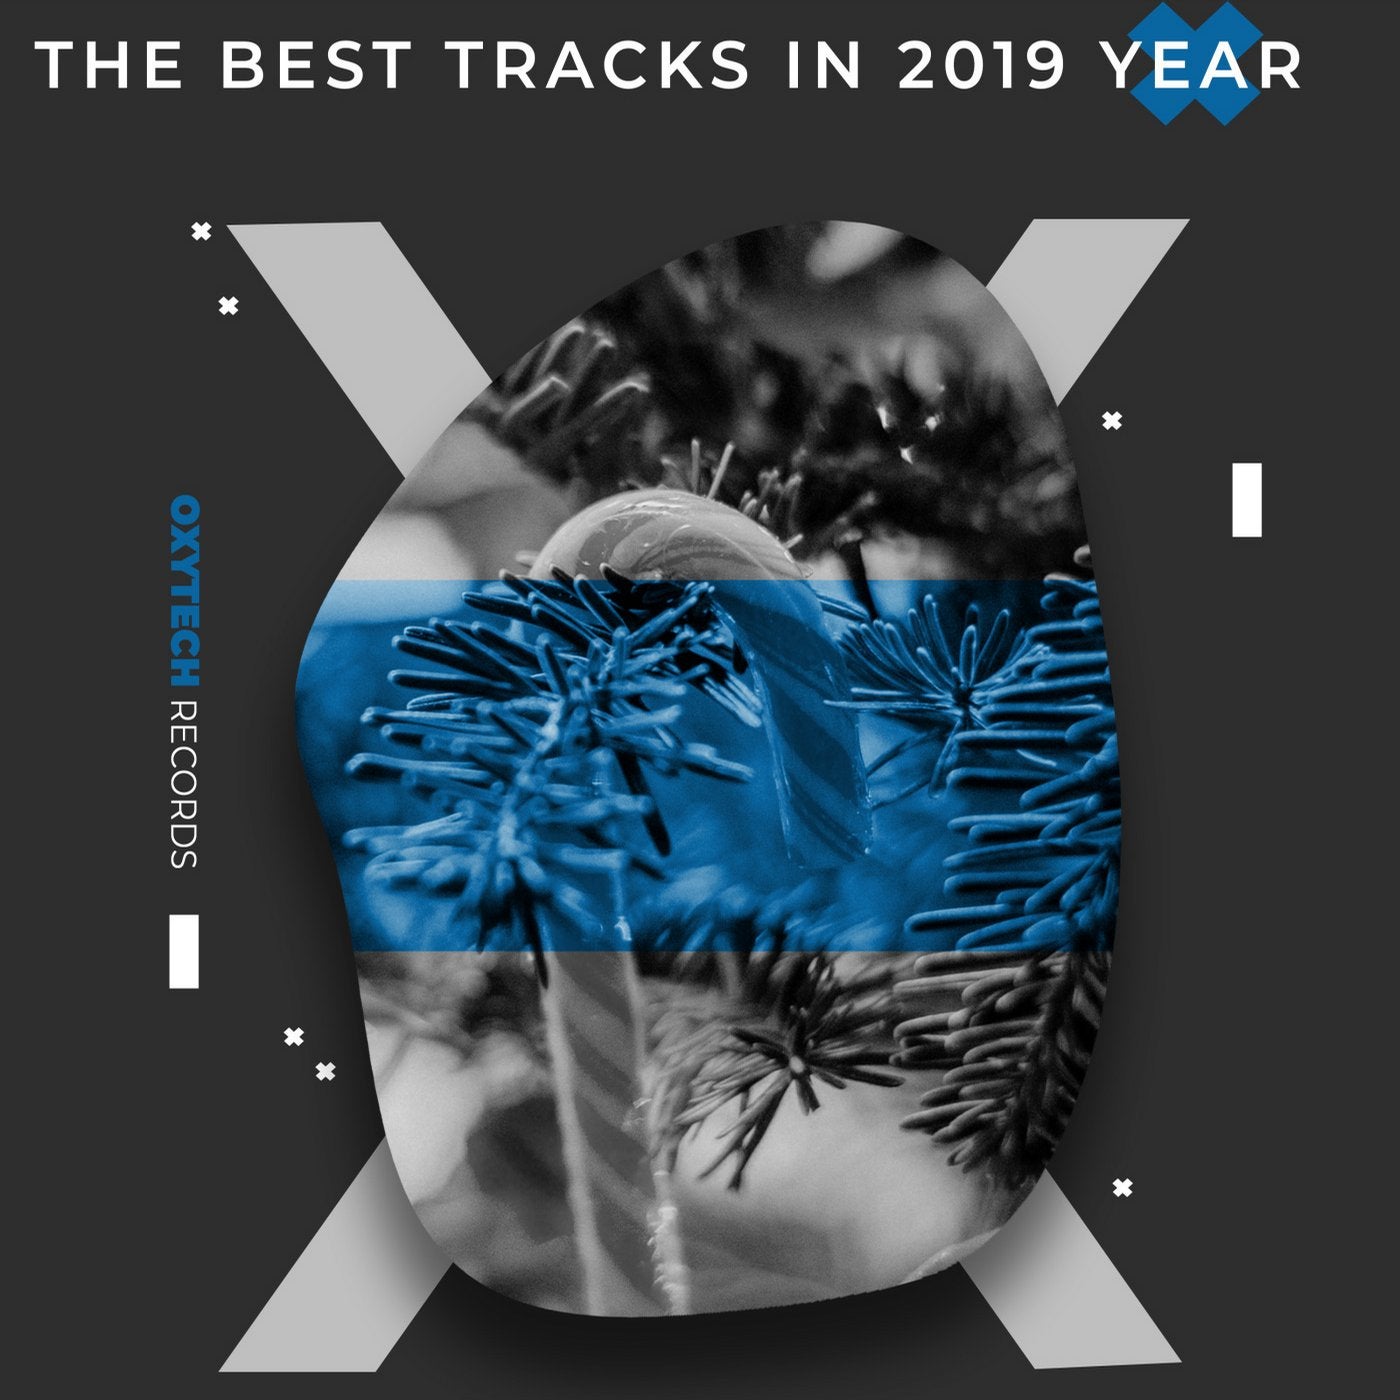 The Best Tracks in 2019 Year